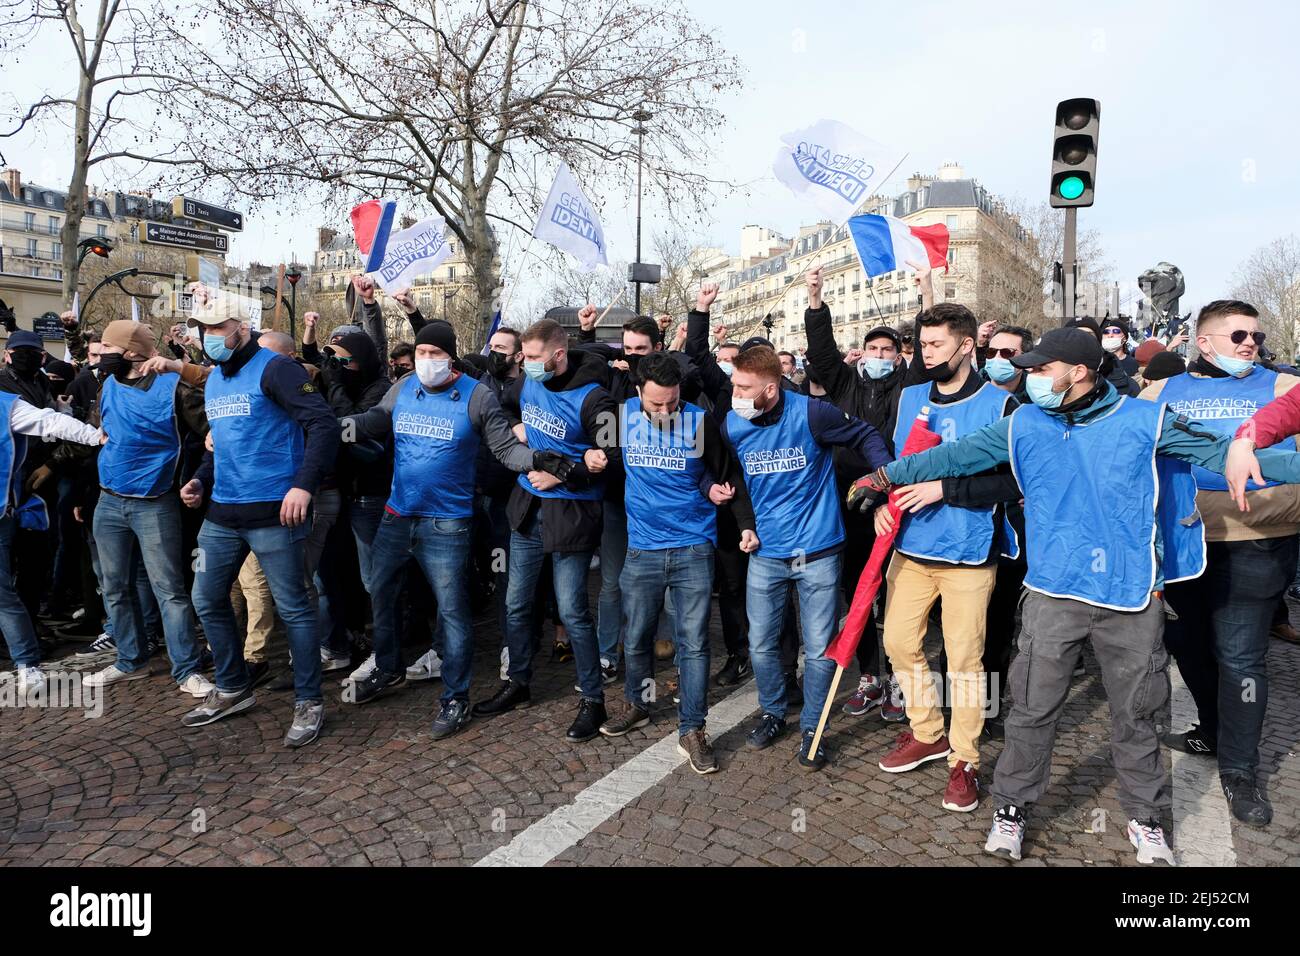 Members supporters of the extreme French wing organisation, Génération identitaire, protest in Paris against dissolution of the organisation by the French interior minister, Gerard Darmanin. According to the minister,